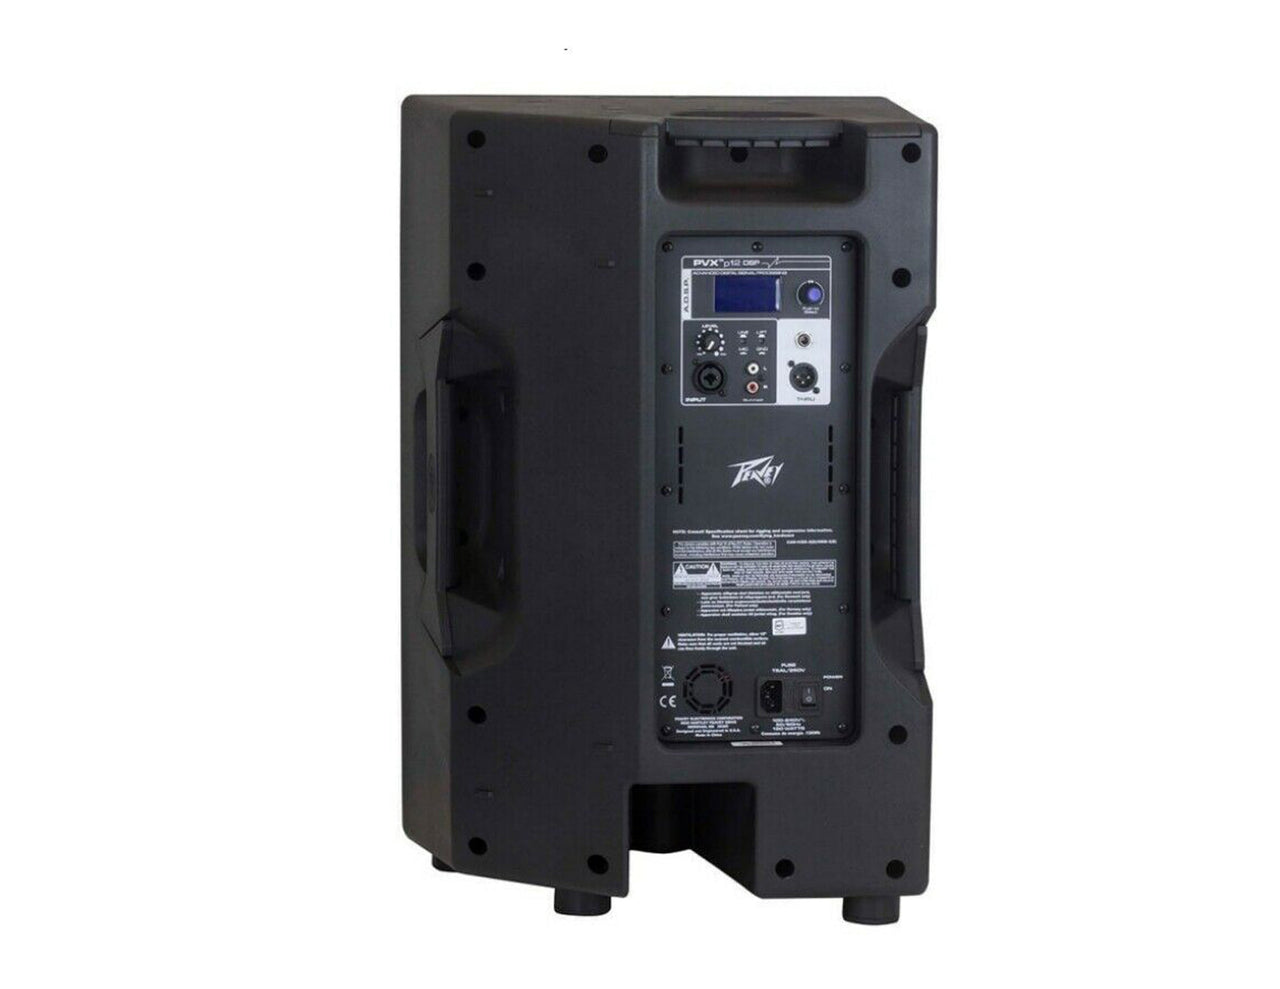 Peavey PVXP12 DSP 12 inch Powered Speaker 830W 12" Powered Speaker with 1.4" Compression Driver,+ Free Mr. Dj Speaker Stand